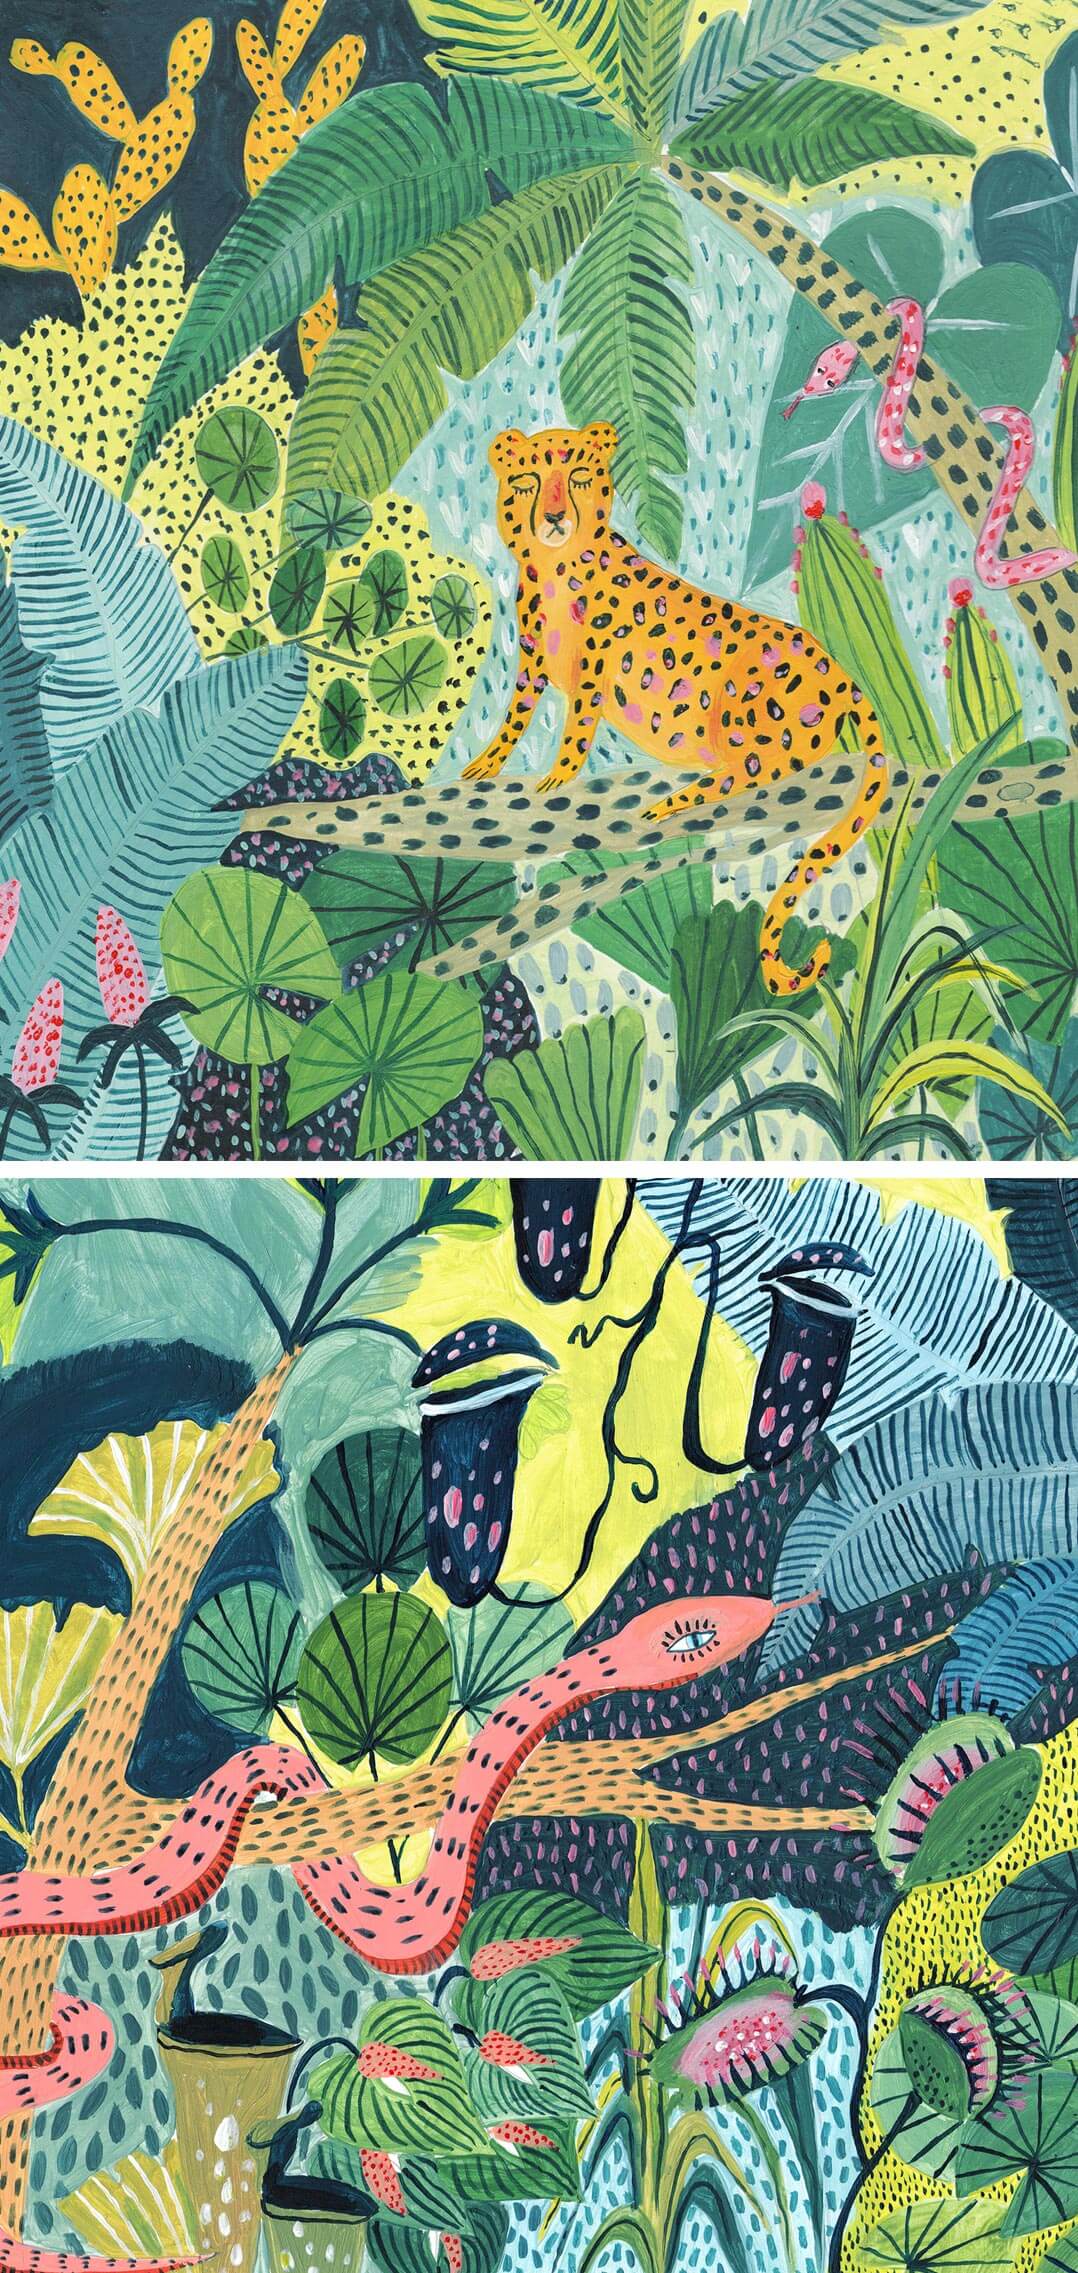 You ll Want to Get Lost in These Colorful Jungle Illustrations